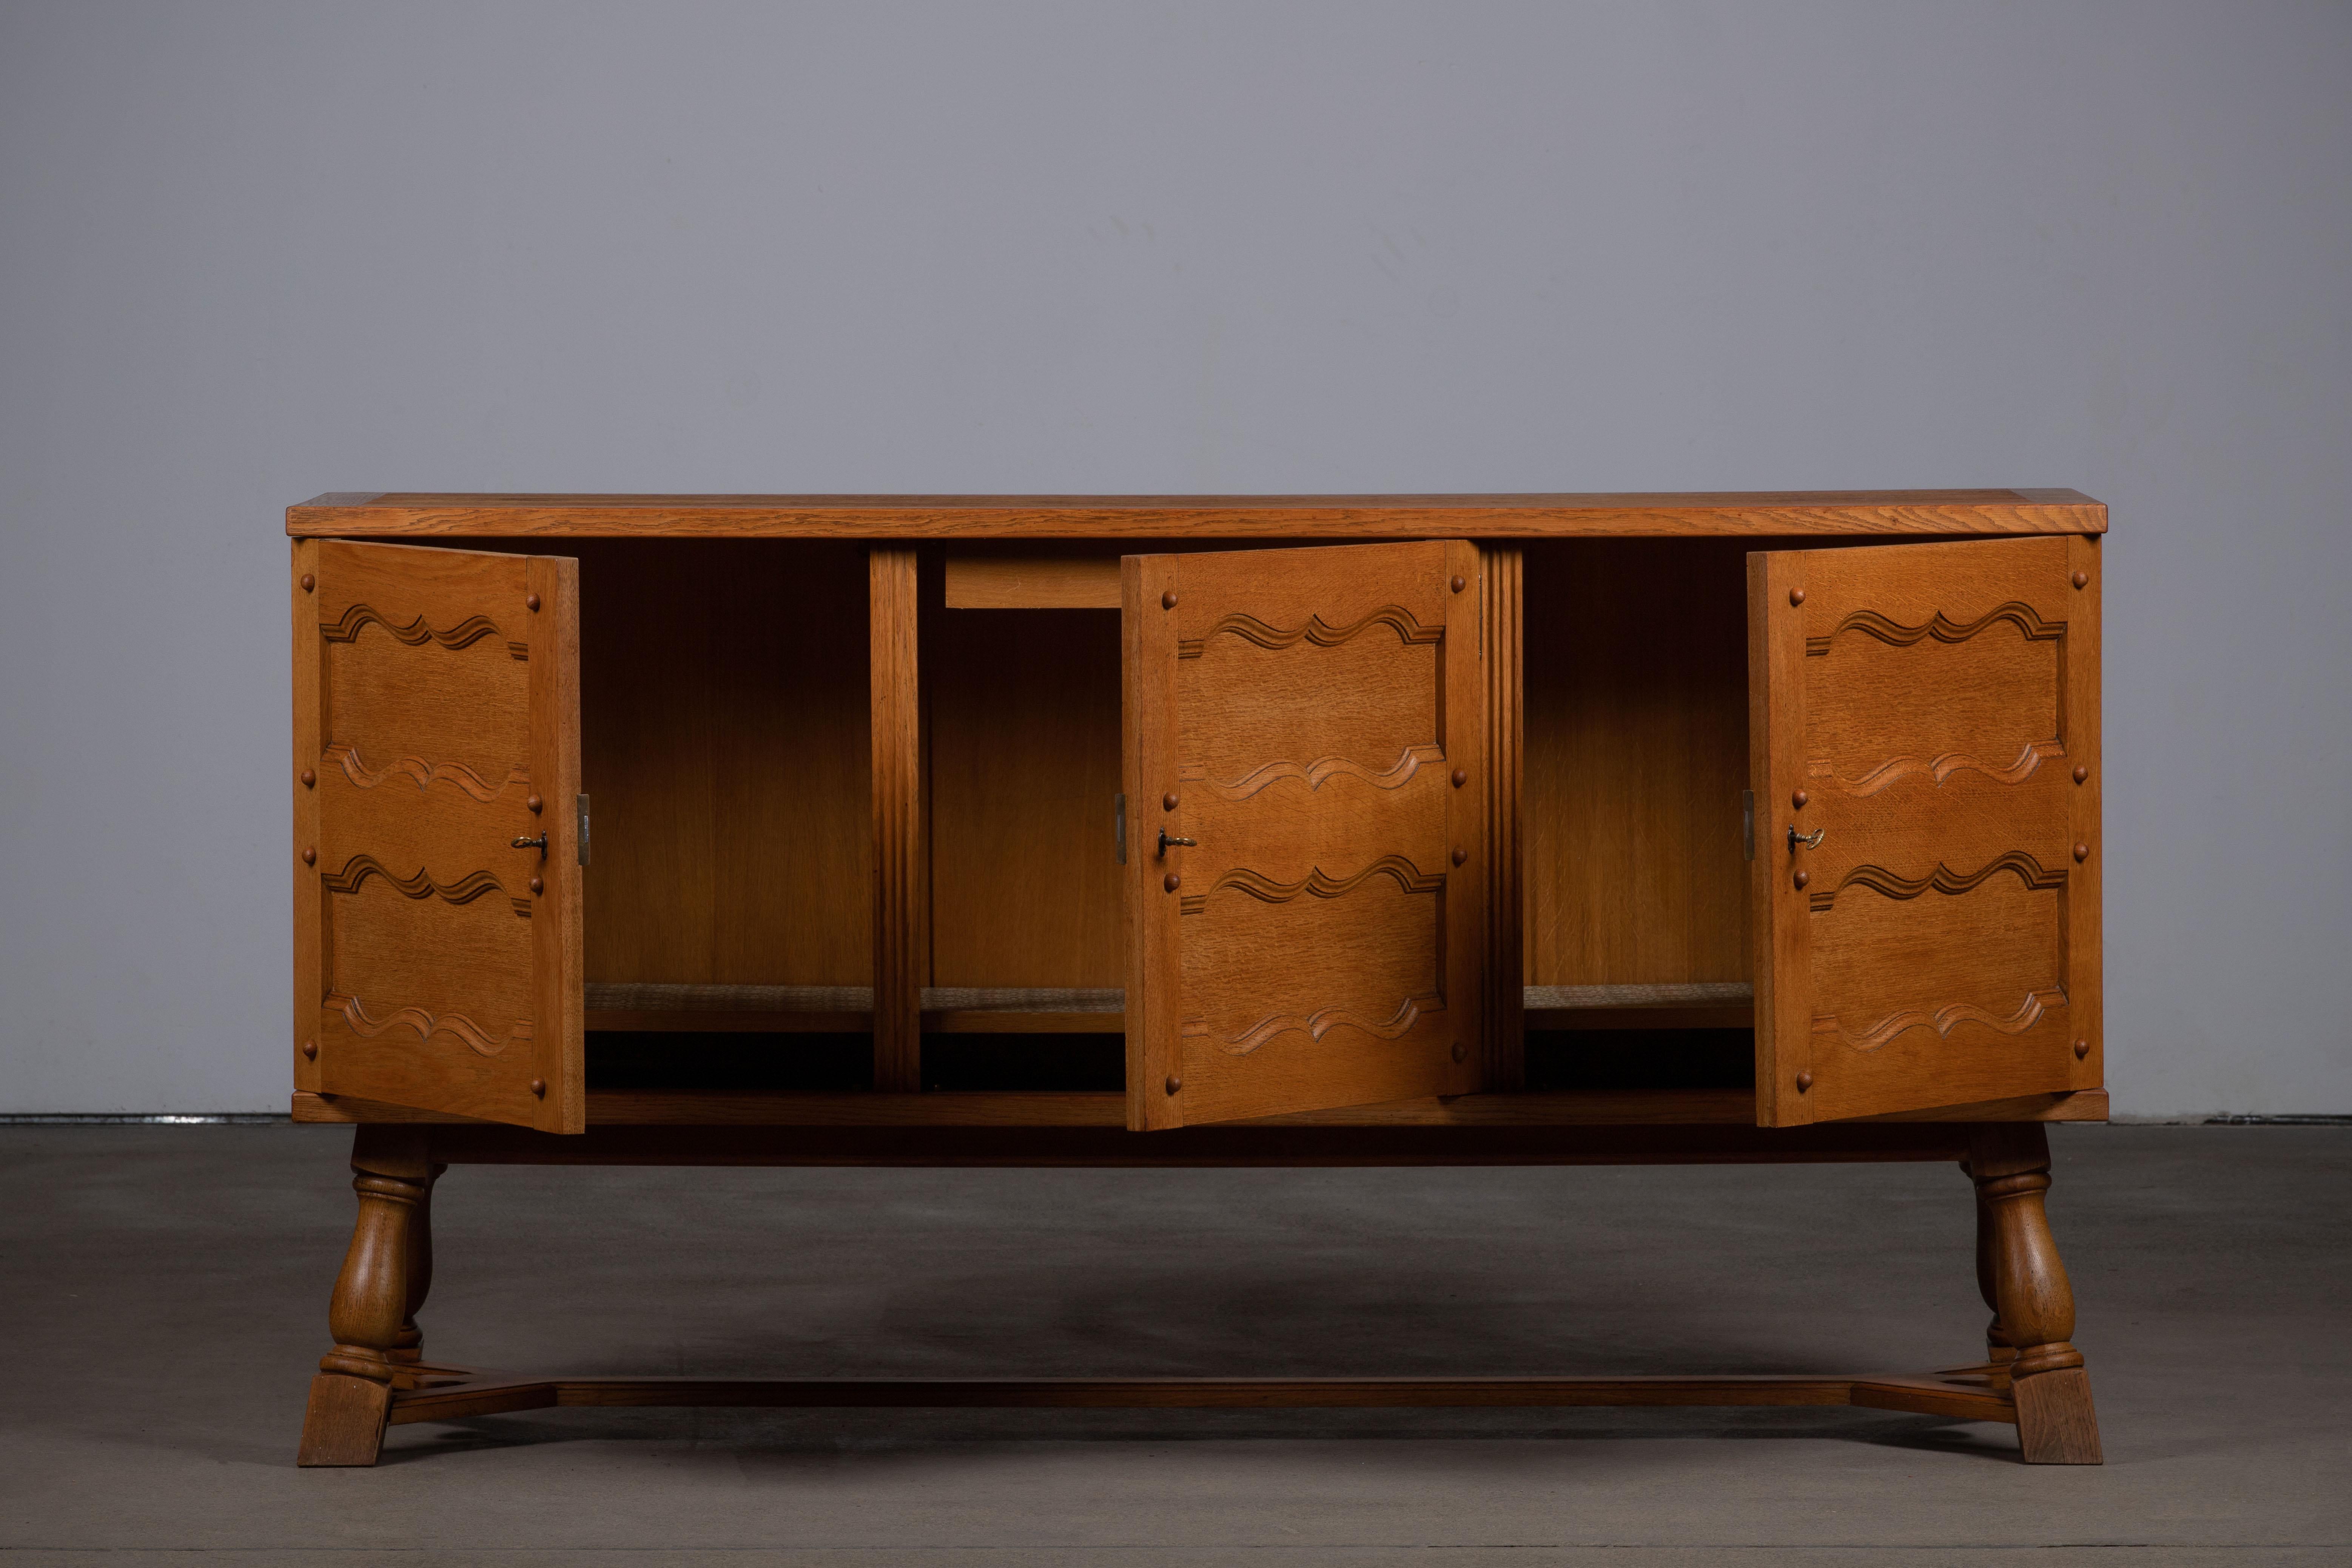 This characteristic cabinet, buffet in solid oak was inspired by the work of French designer duo Guillerme et Chambron or Charlotte Perriand.

Unearthed in a chic chalet in Courchevelle, this sideboard from the 60s offers an authentic and warm